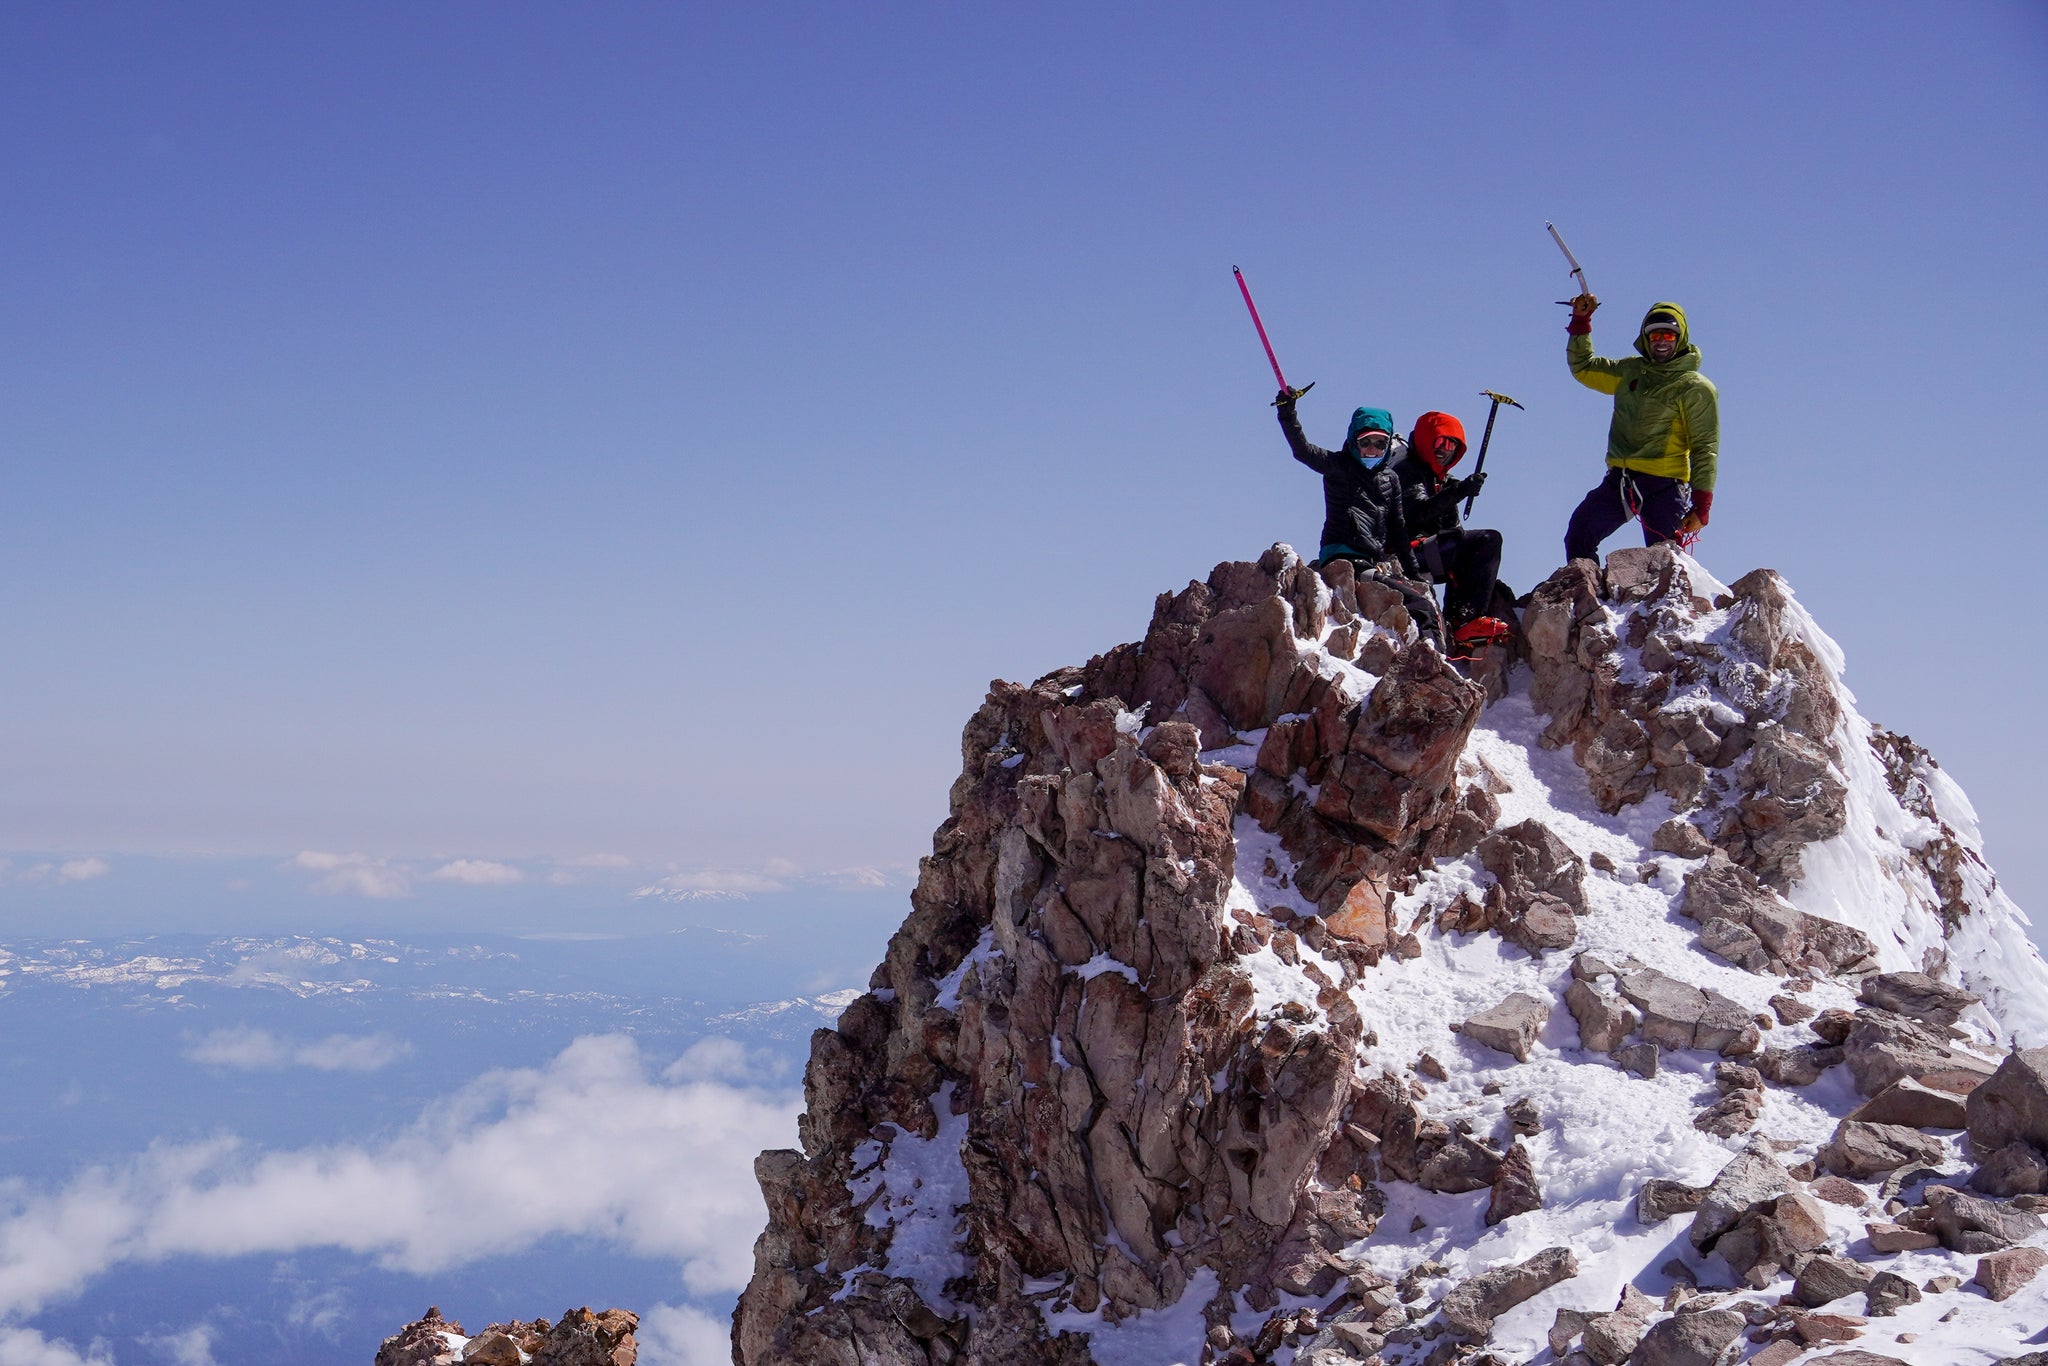 A Blackbird Mountain Guides' team on the summit of Mount Shasta this week after testing current climbing conditions on the avalanche Gulch route